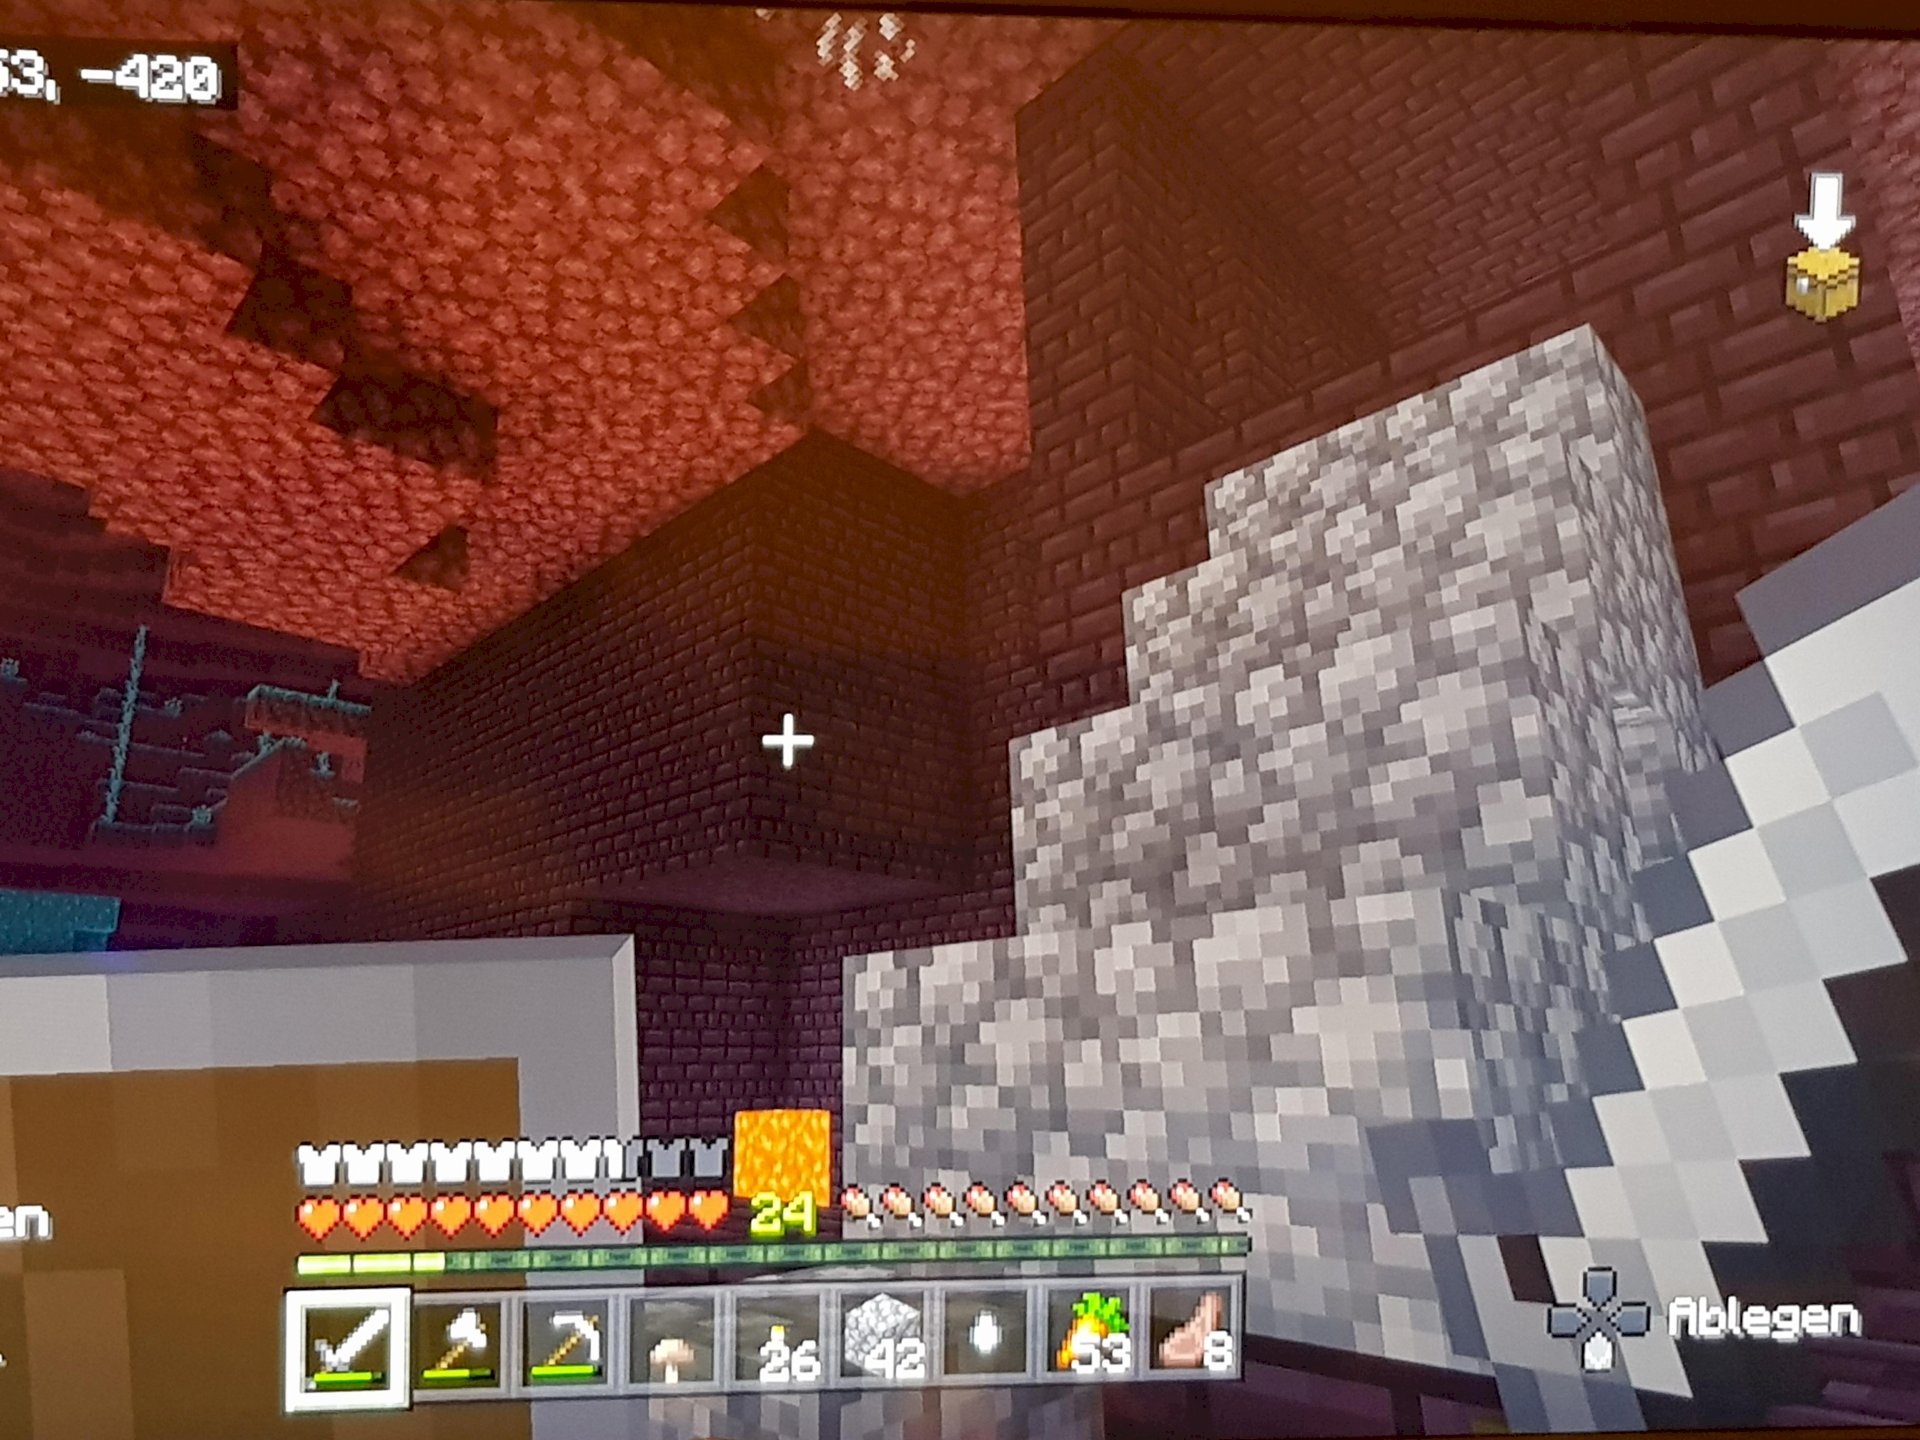 No nether warts in Nether Fortress Minecraft - 2